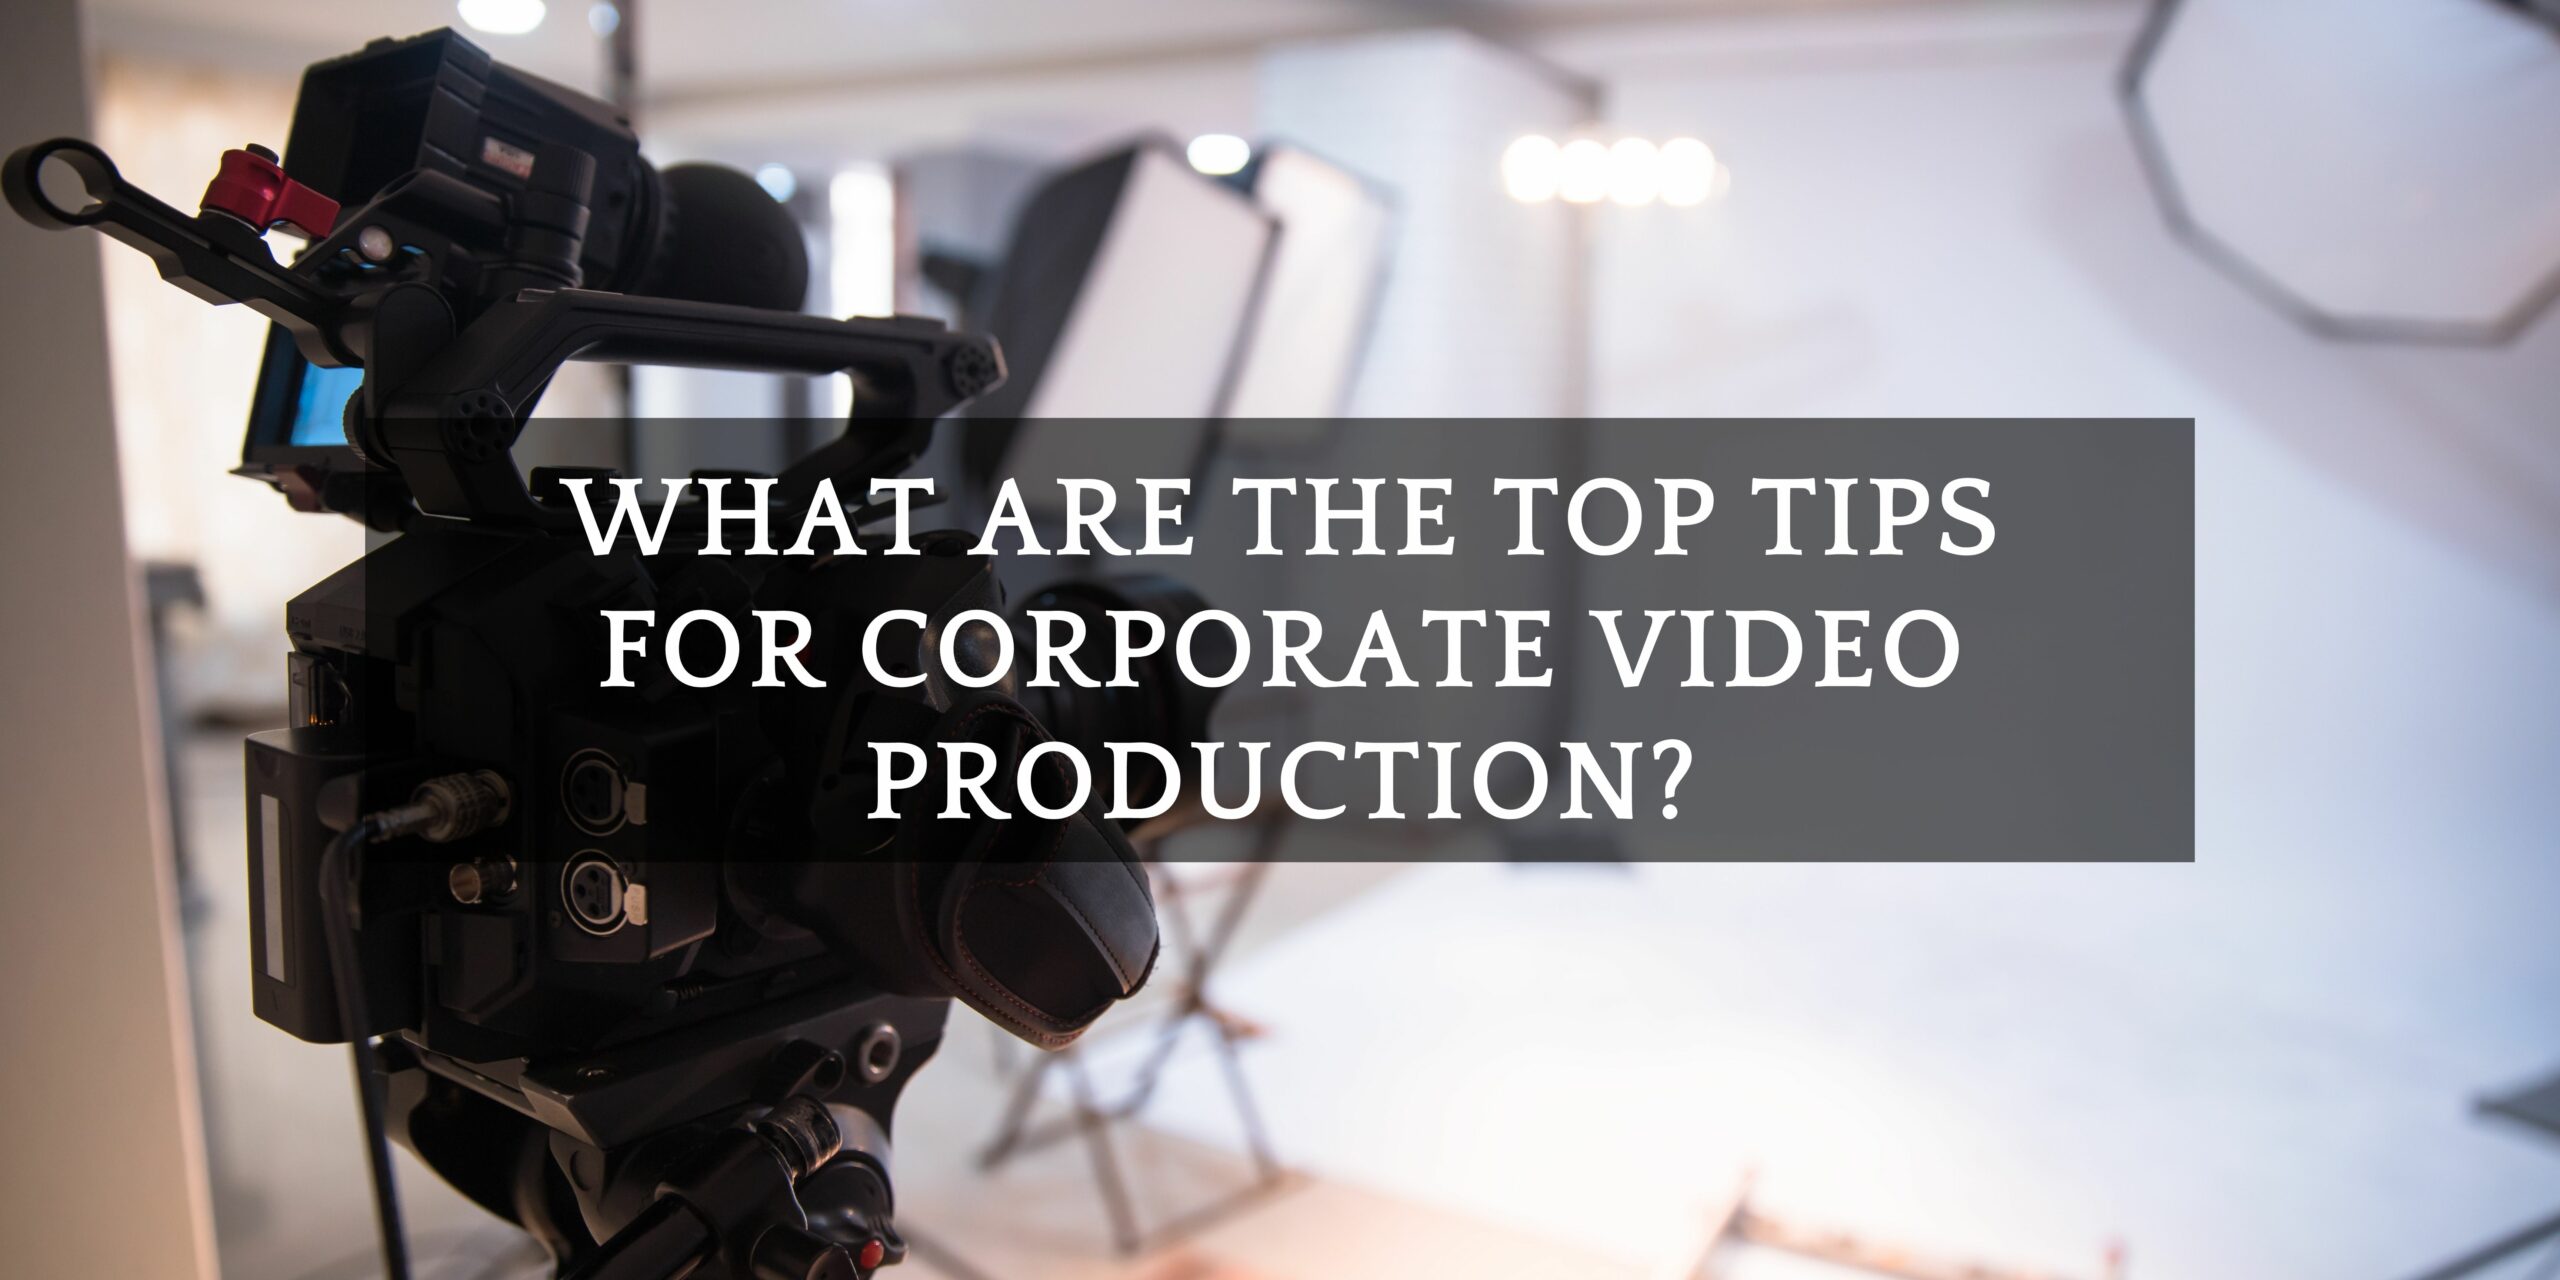 What are the top tips for corporate video production?